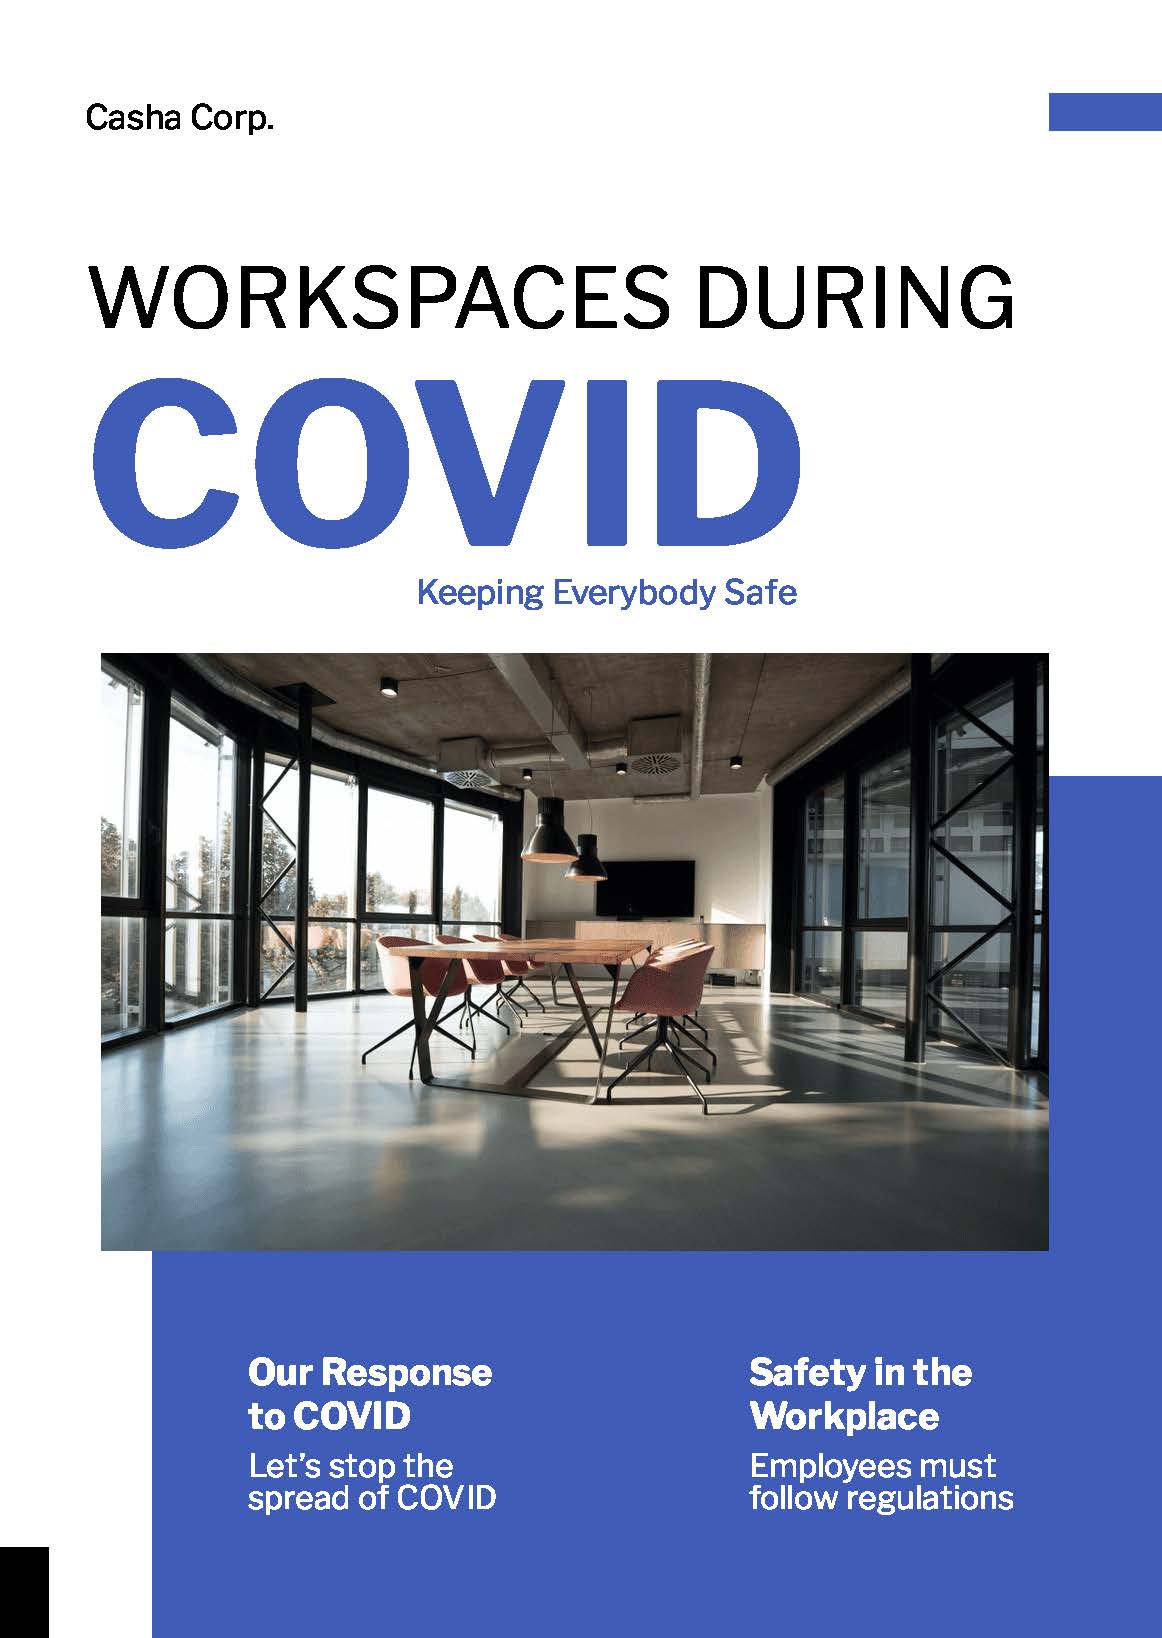 Free Workspaces During COVID Booklet Template